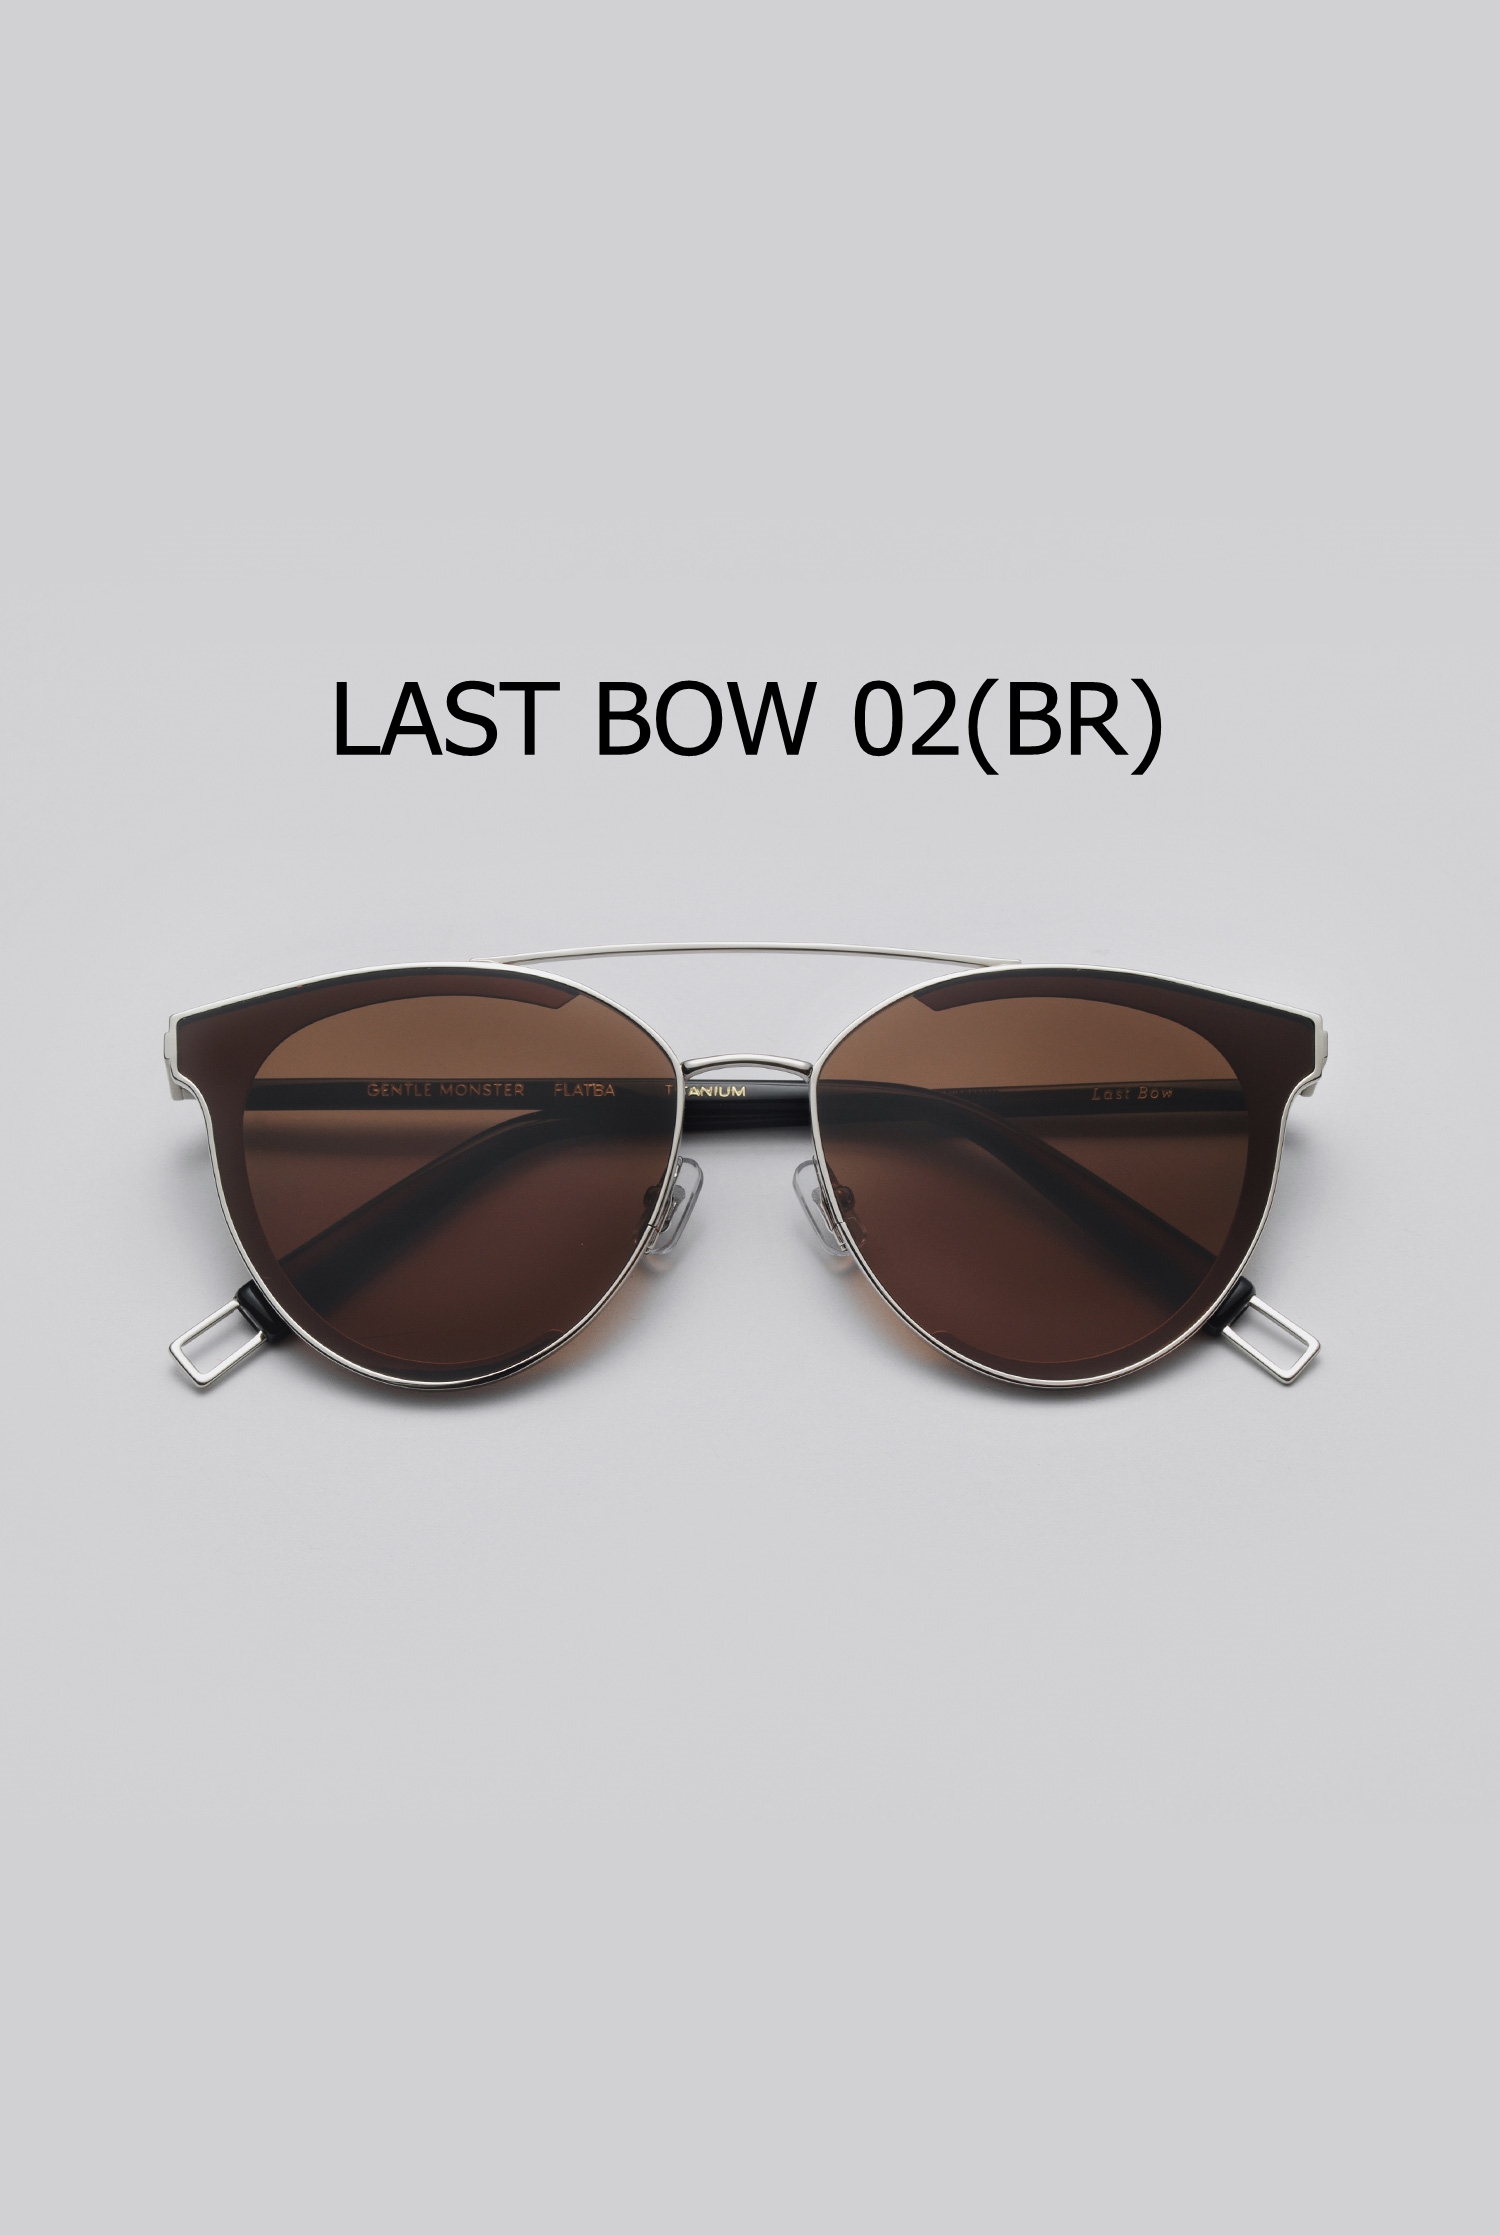 LAST BOW 02(BR) 